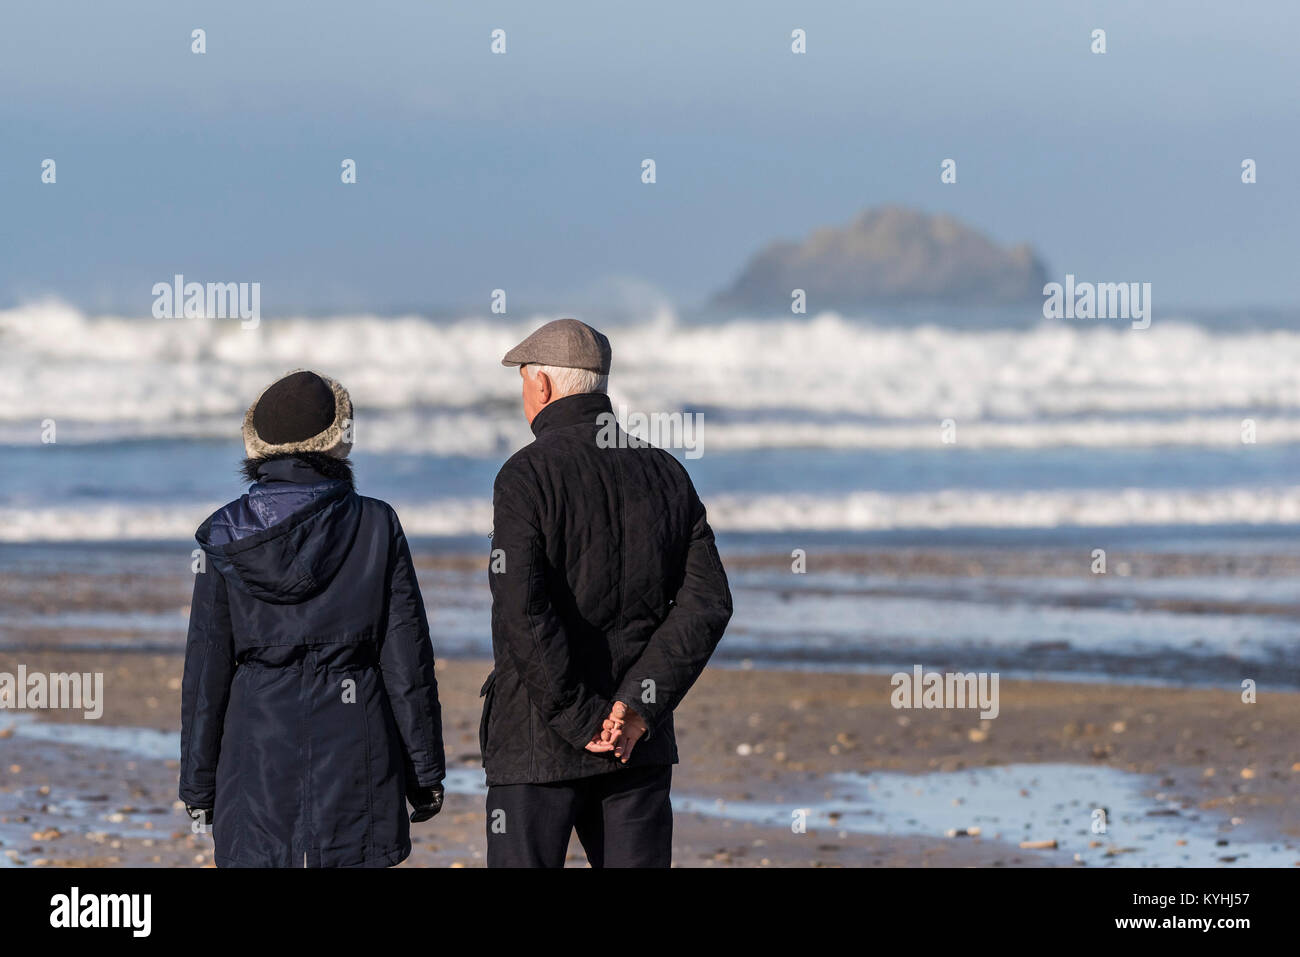 Two people couple standing on a beach enjoying the view. Stock Photo